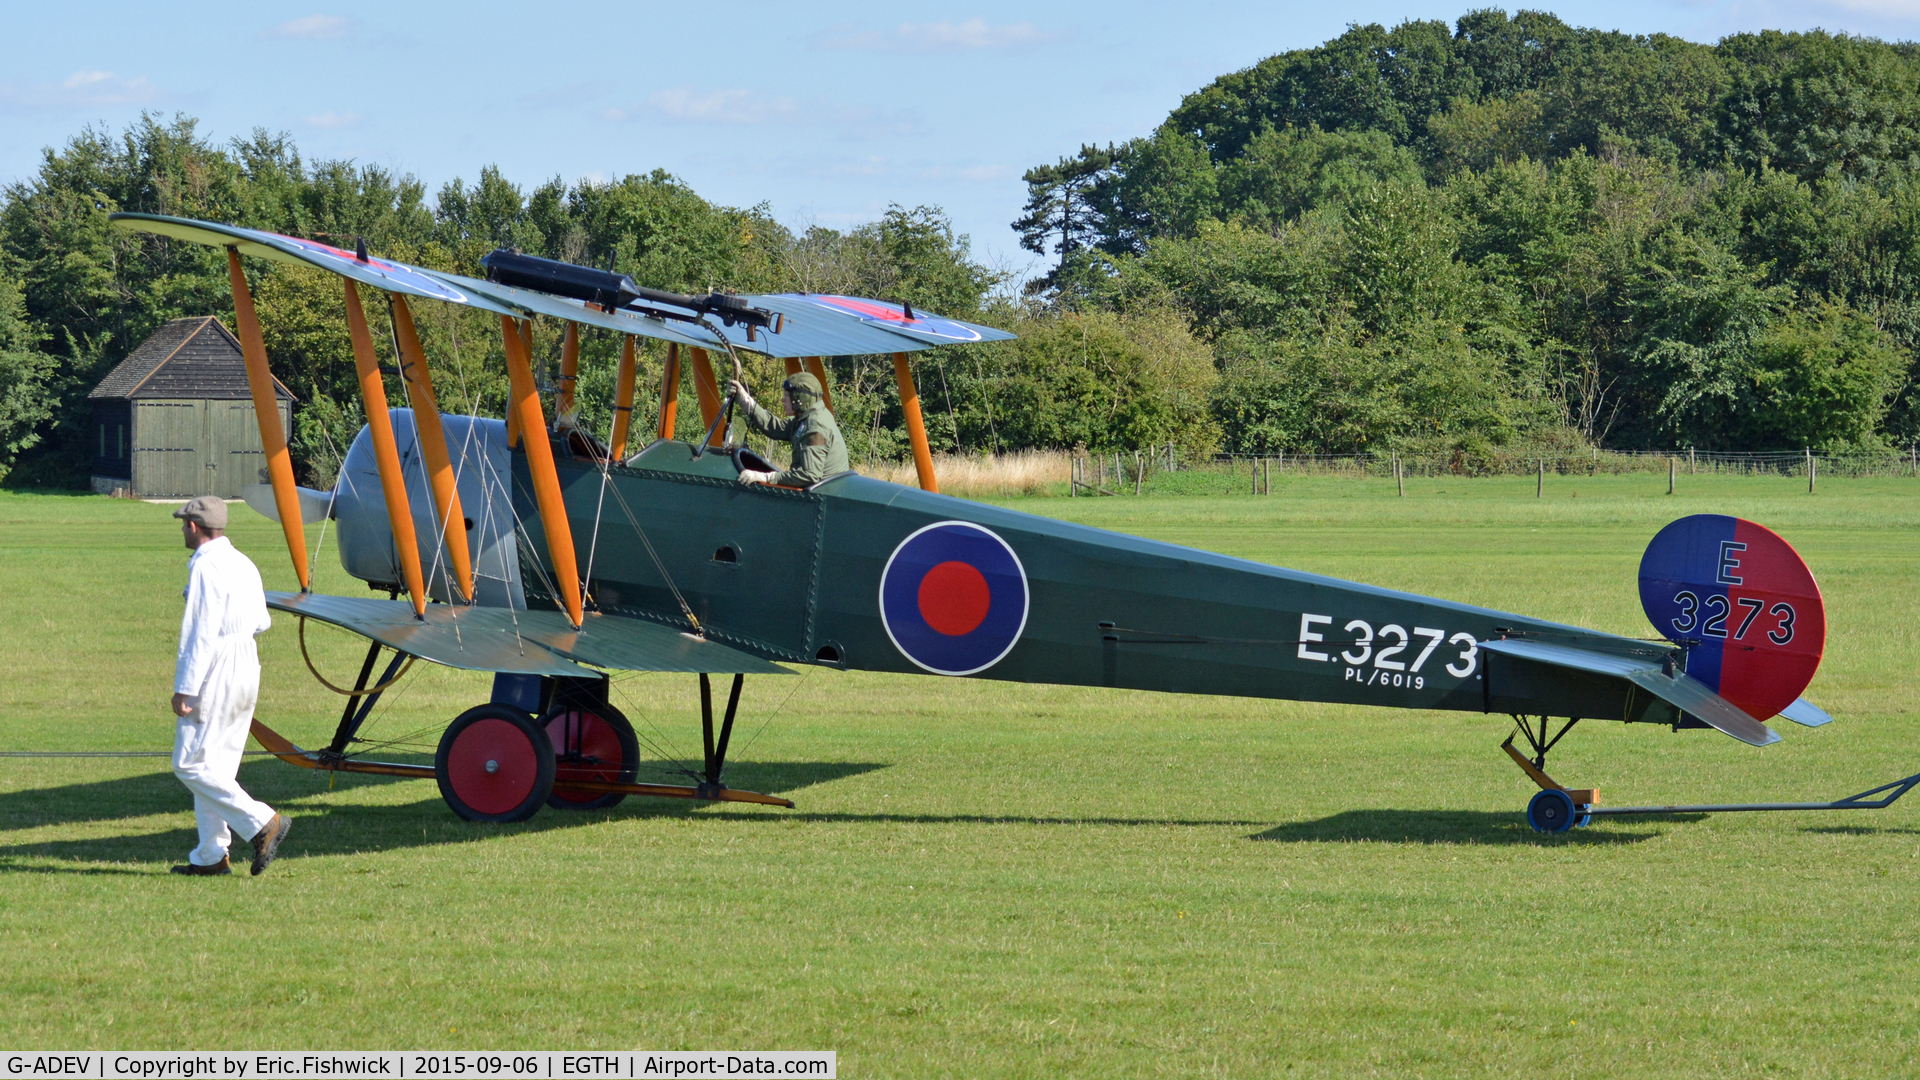 G-ADEV, 1918 Avro 504K C/N R3/LE/61400, 4. E3273 at The Shuttleworth Pagent Airshow, Sep. 2015.